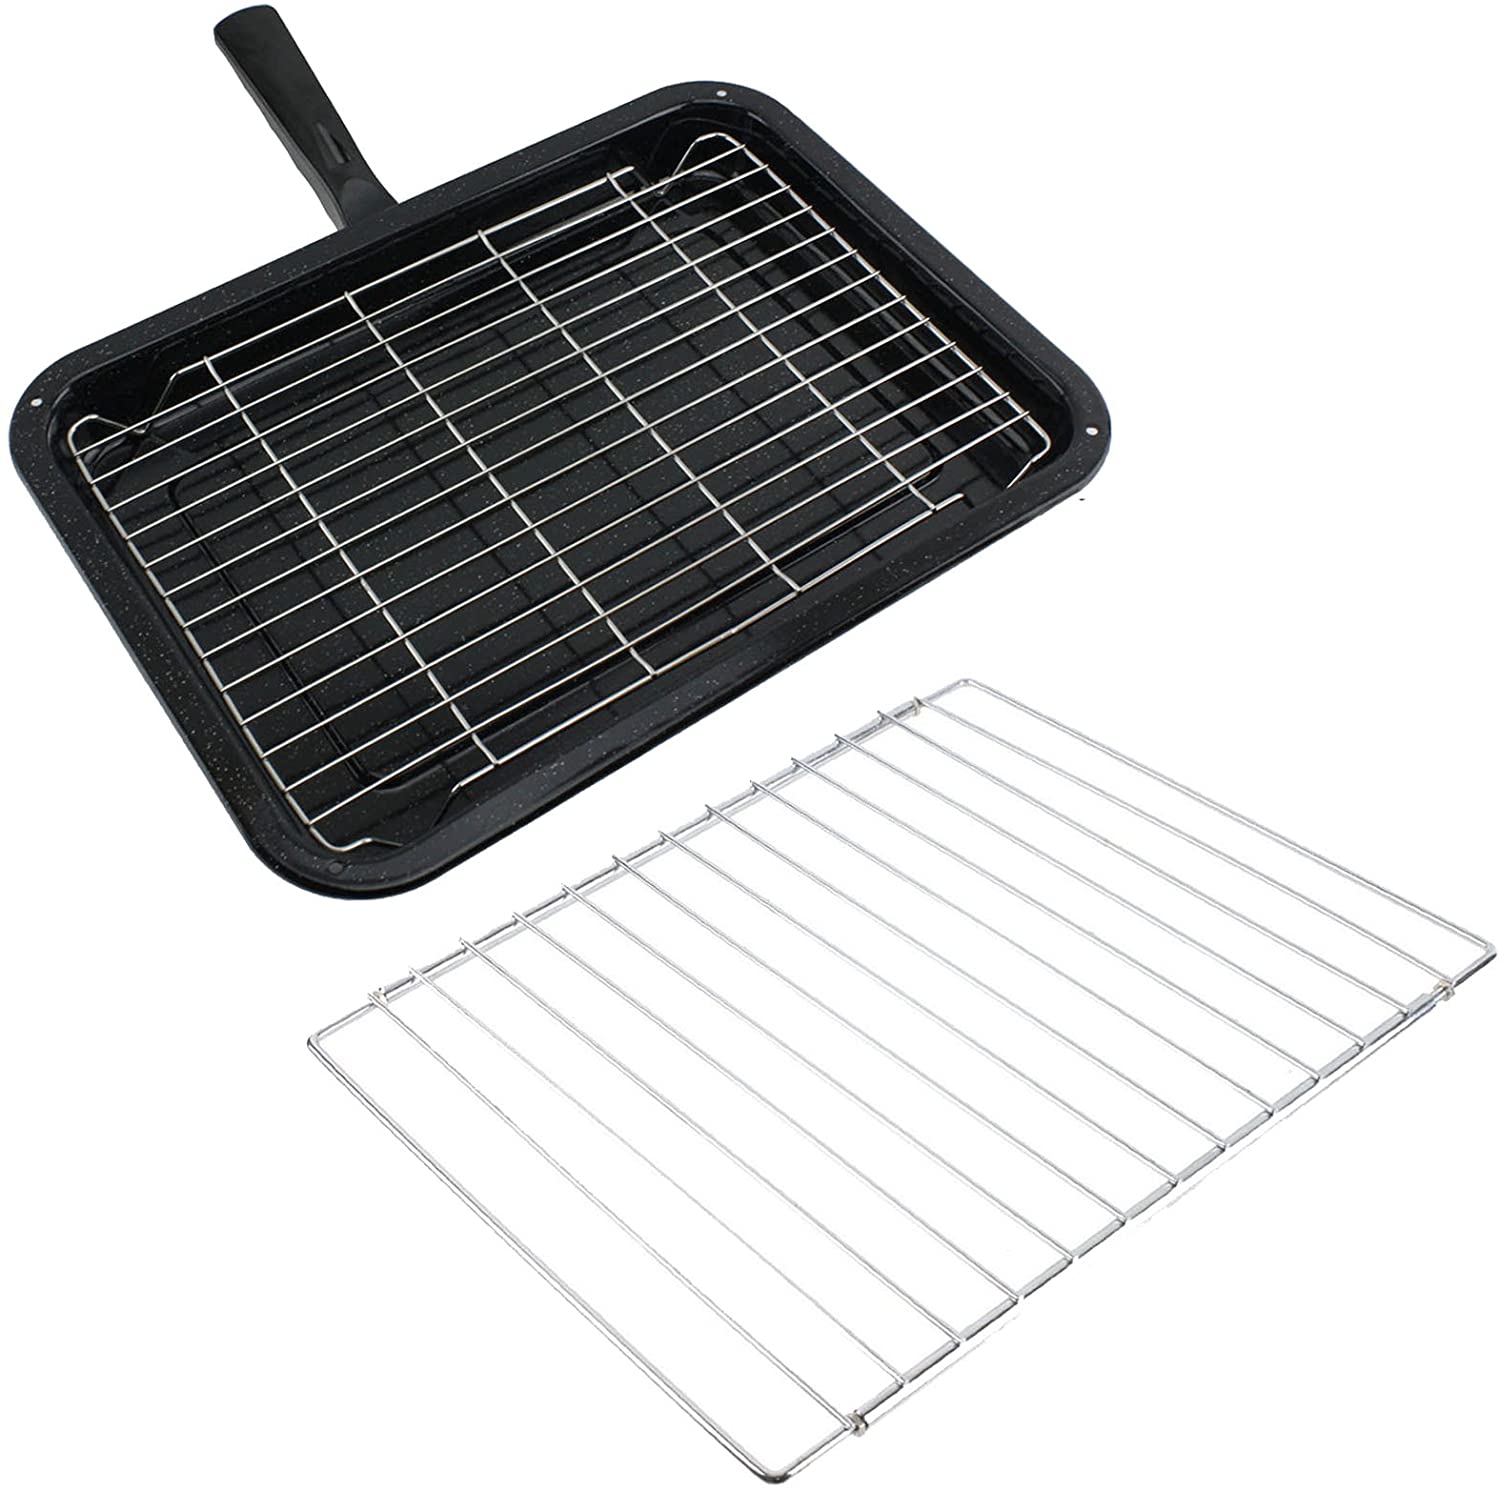 Small Grill Pan with Rack and Detachable Handle + Adjustable Grill Shelf for ZANUSSI Oven Cooker